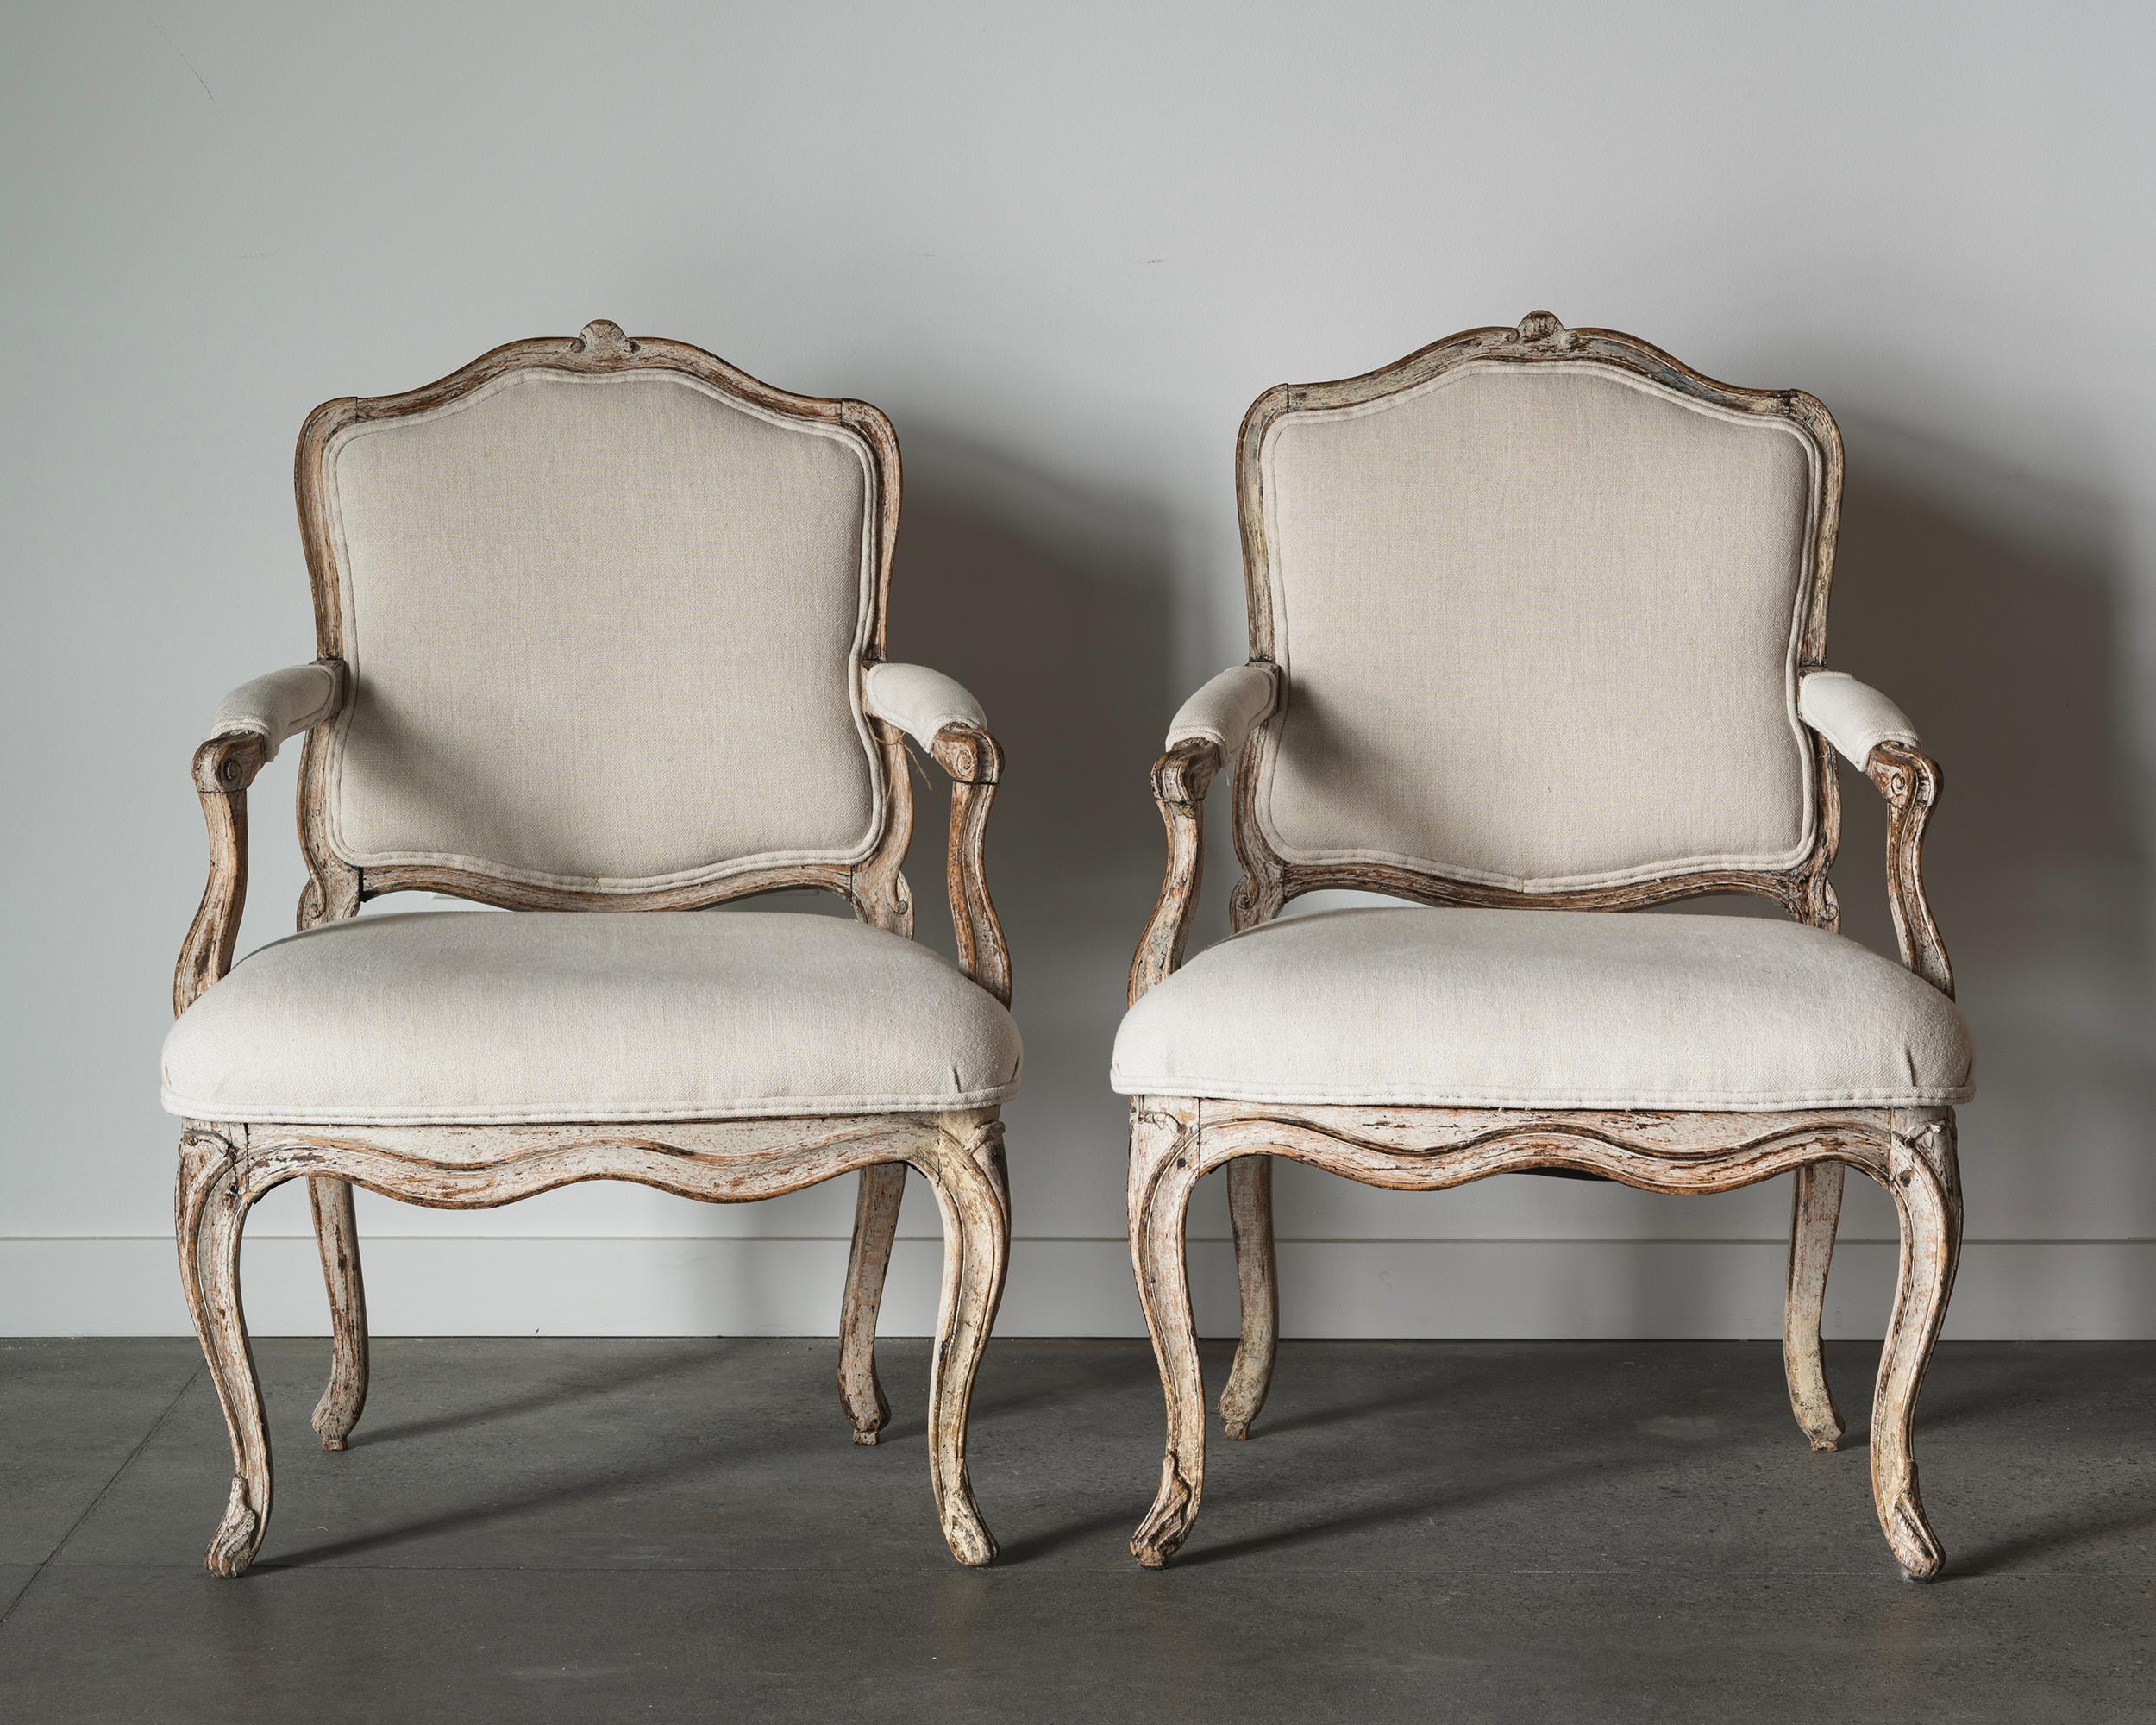 Fine Pair of 18th Century Swedish Rococo Armchairs In Good Condition For Sale In Mjöhult, SE